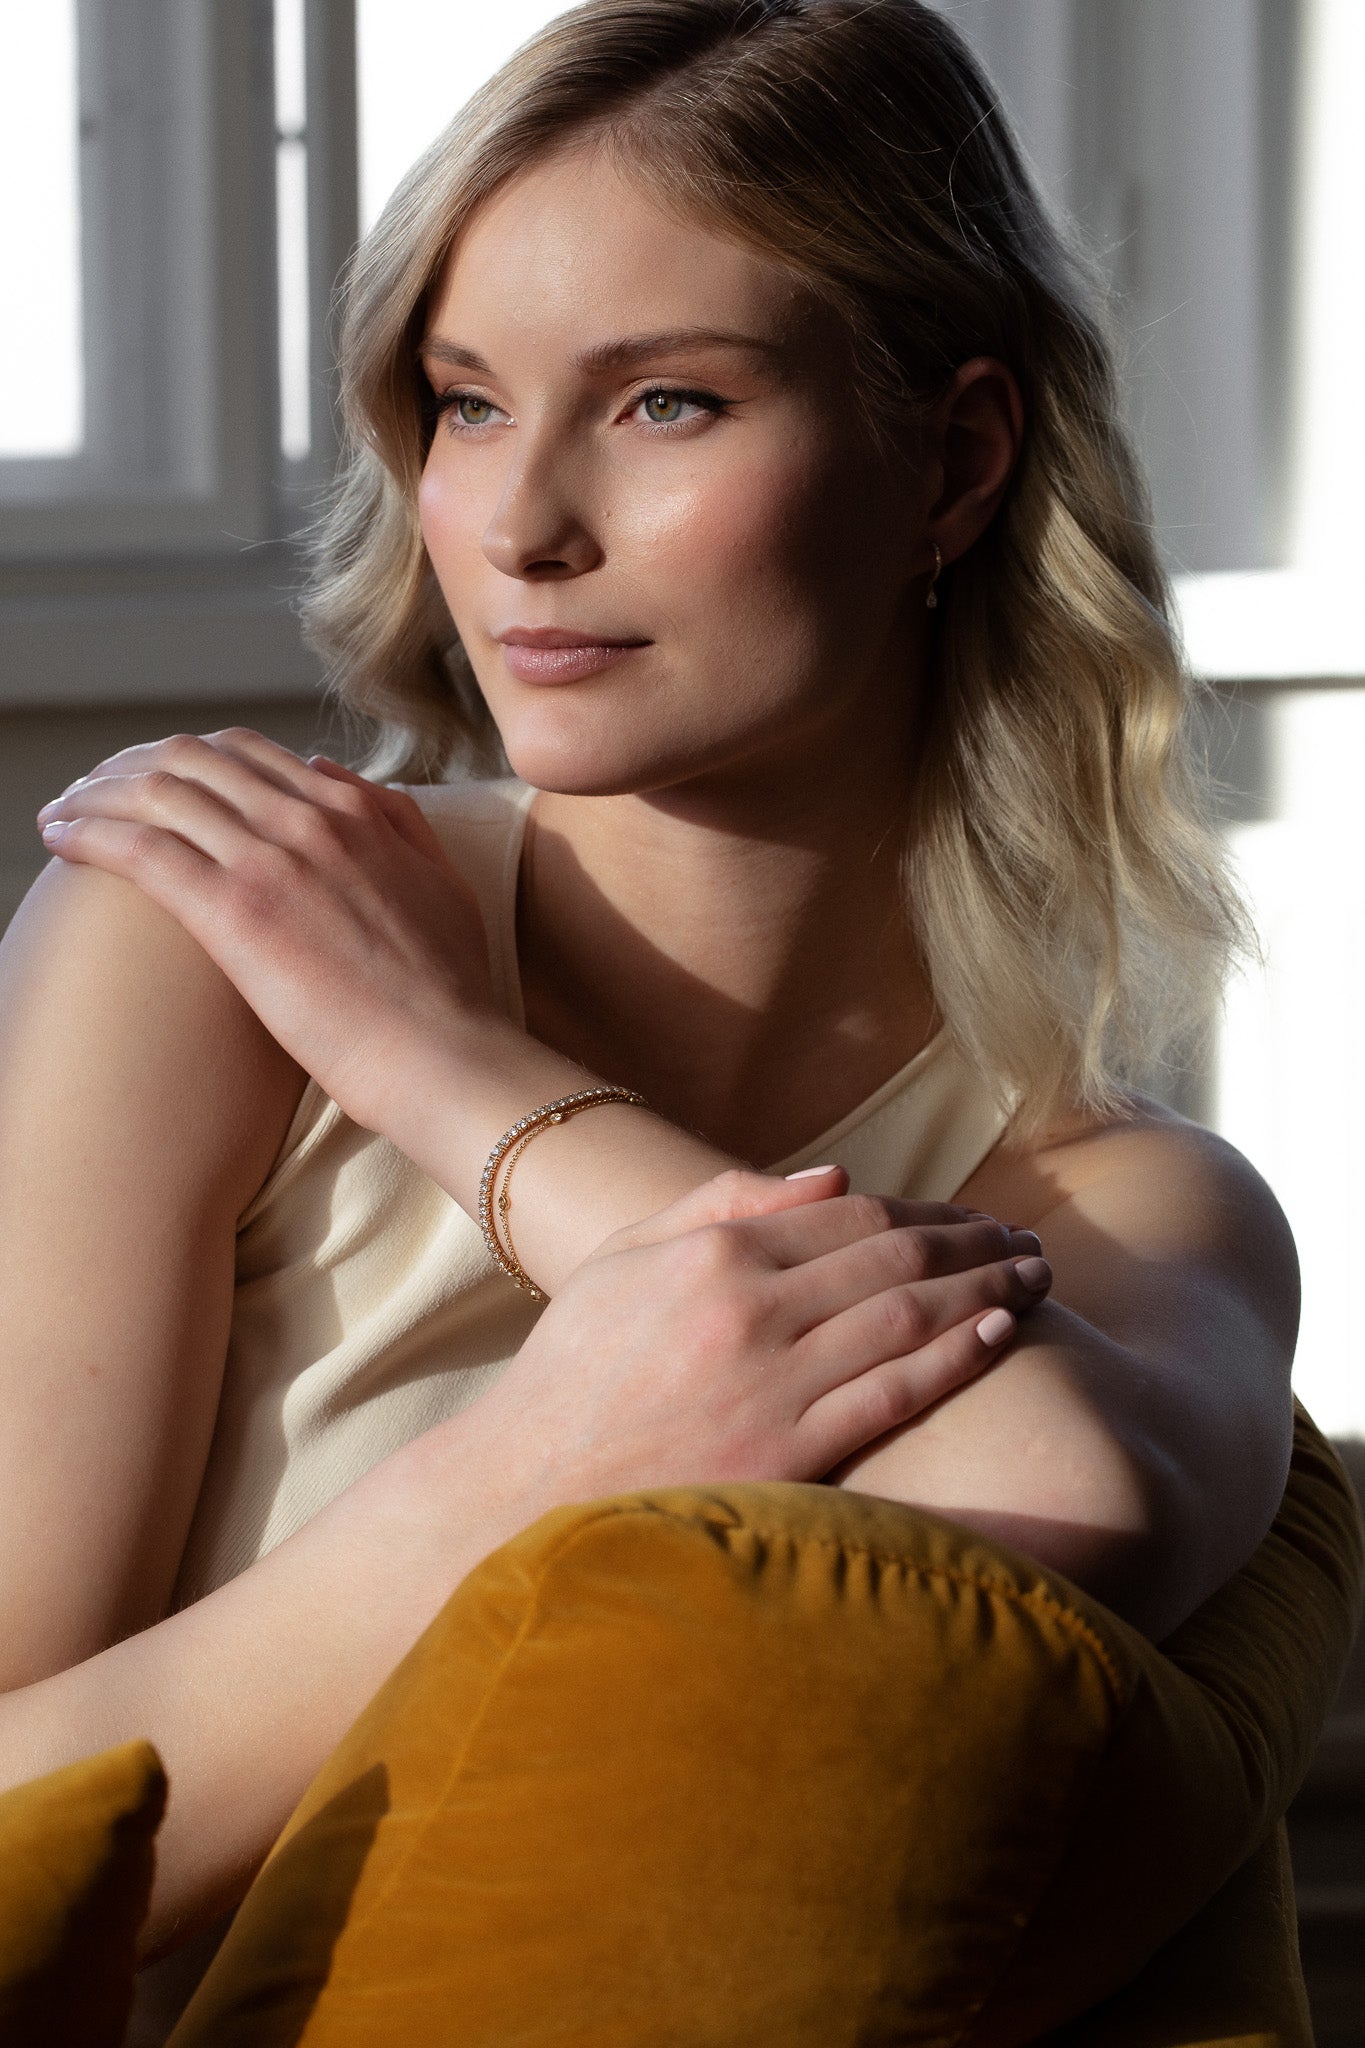 Elegant woman wearing sustainable Diamond Station Bracelet that is made of ethical lab-grown diamonds and recycled solid gold. 